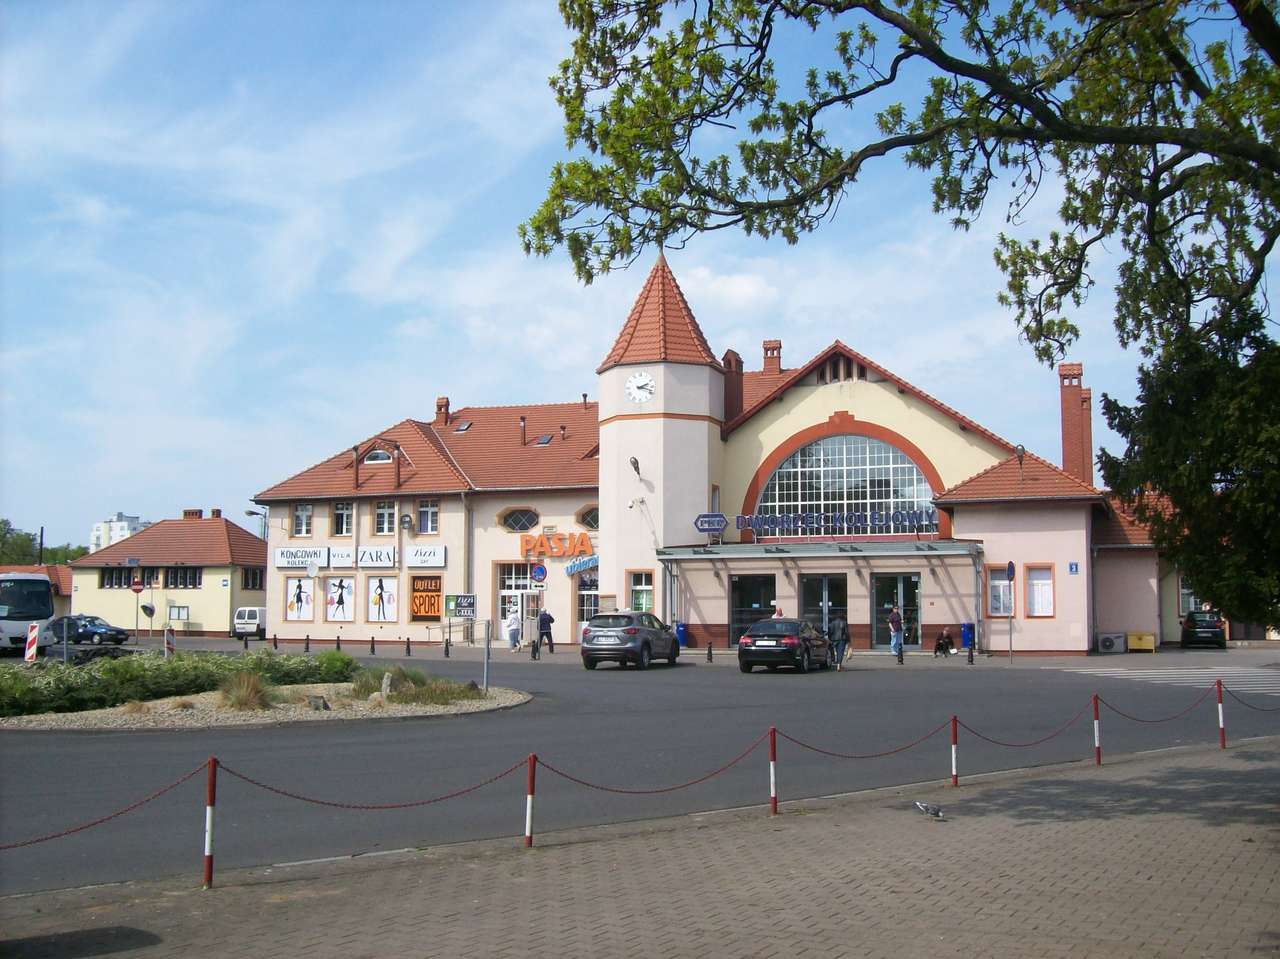 Train Station jigsaw puzzle online